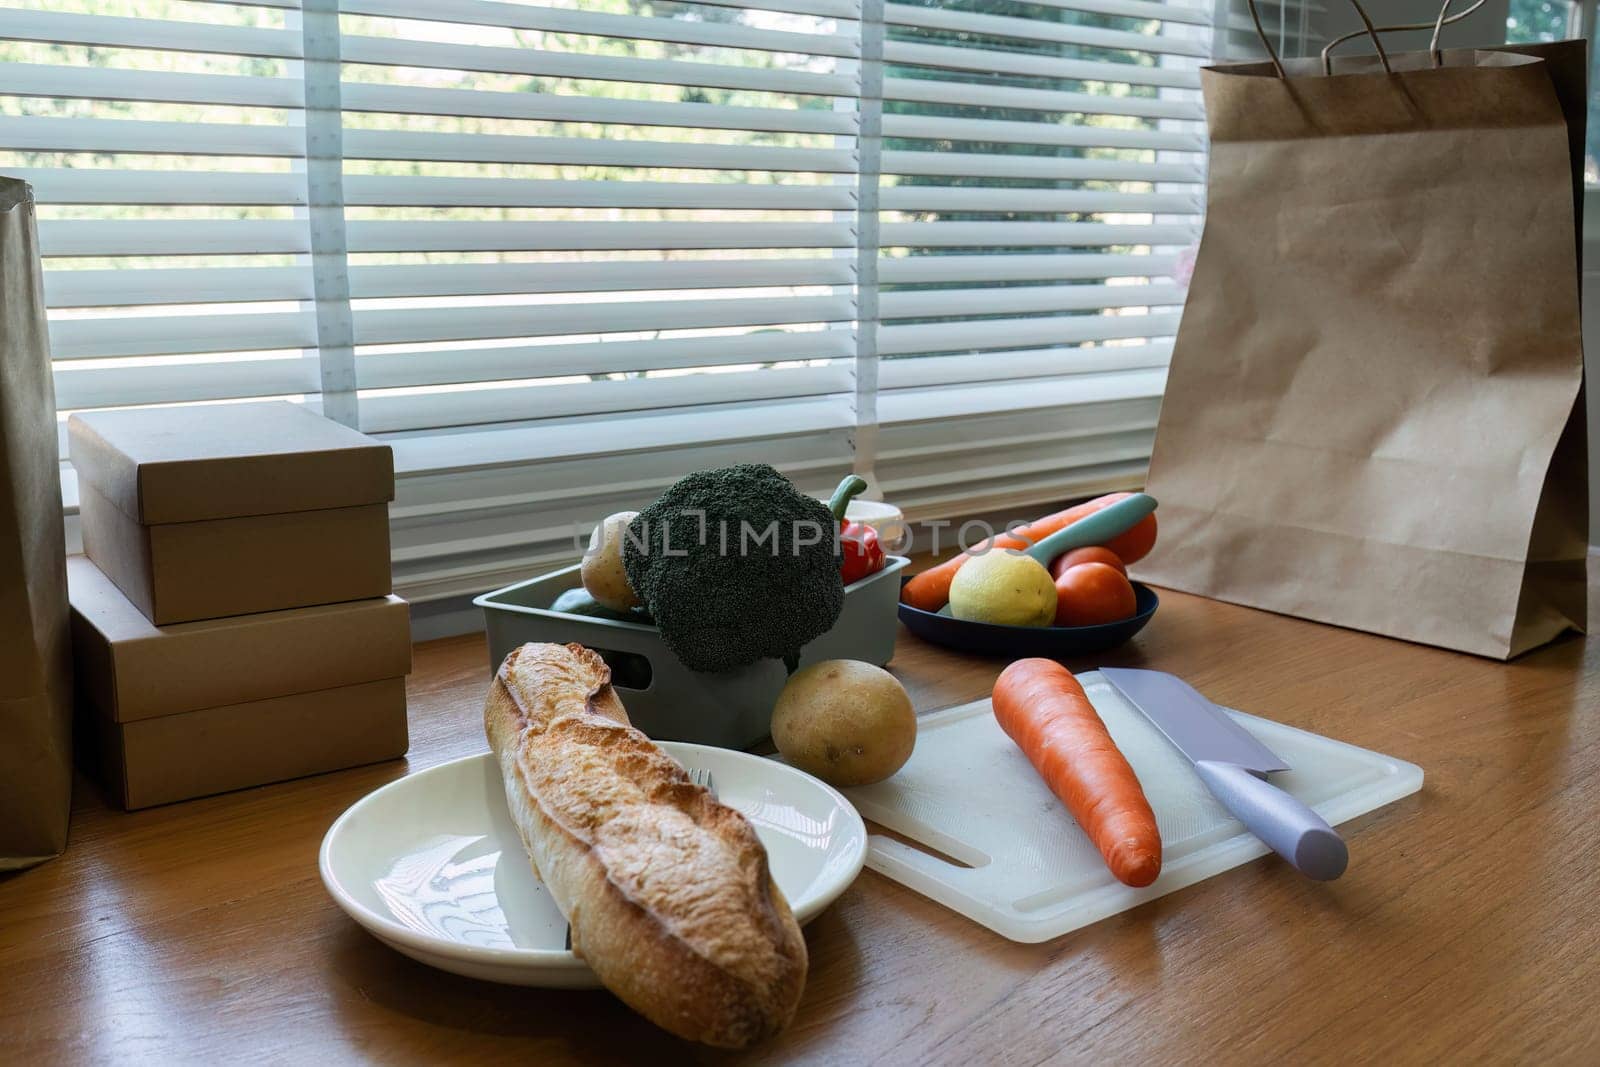 healthy and vegetarian foods background. Vegetables and bread on brown table. Prepare to cook healthy food.